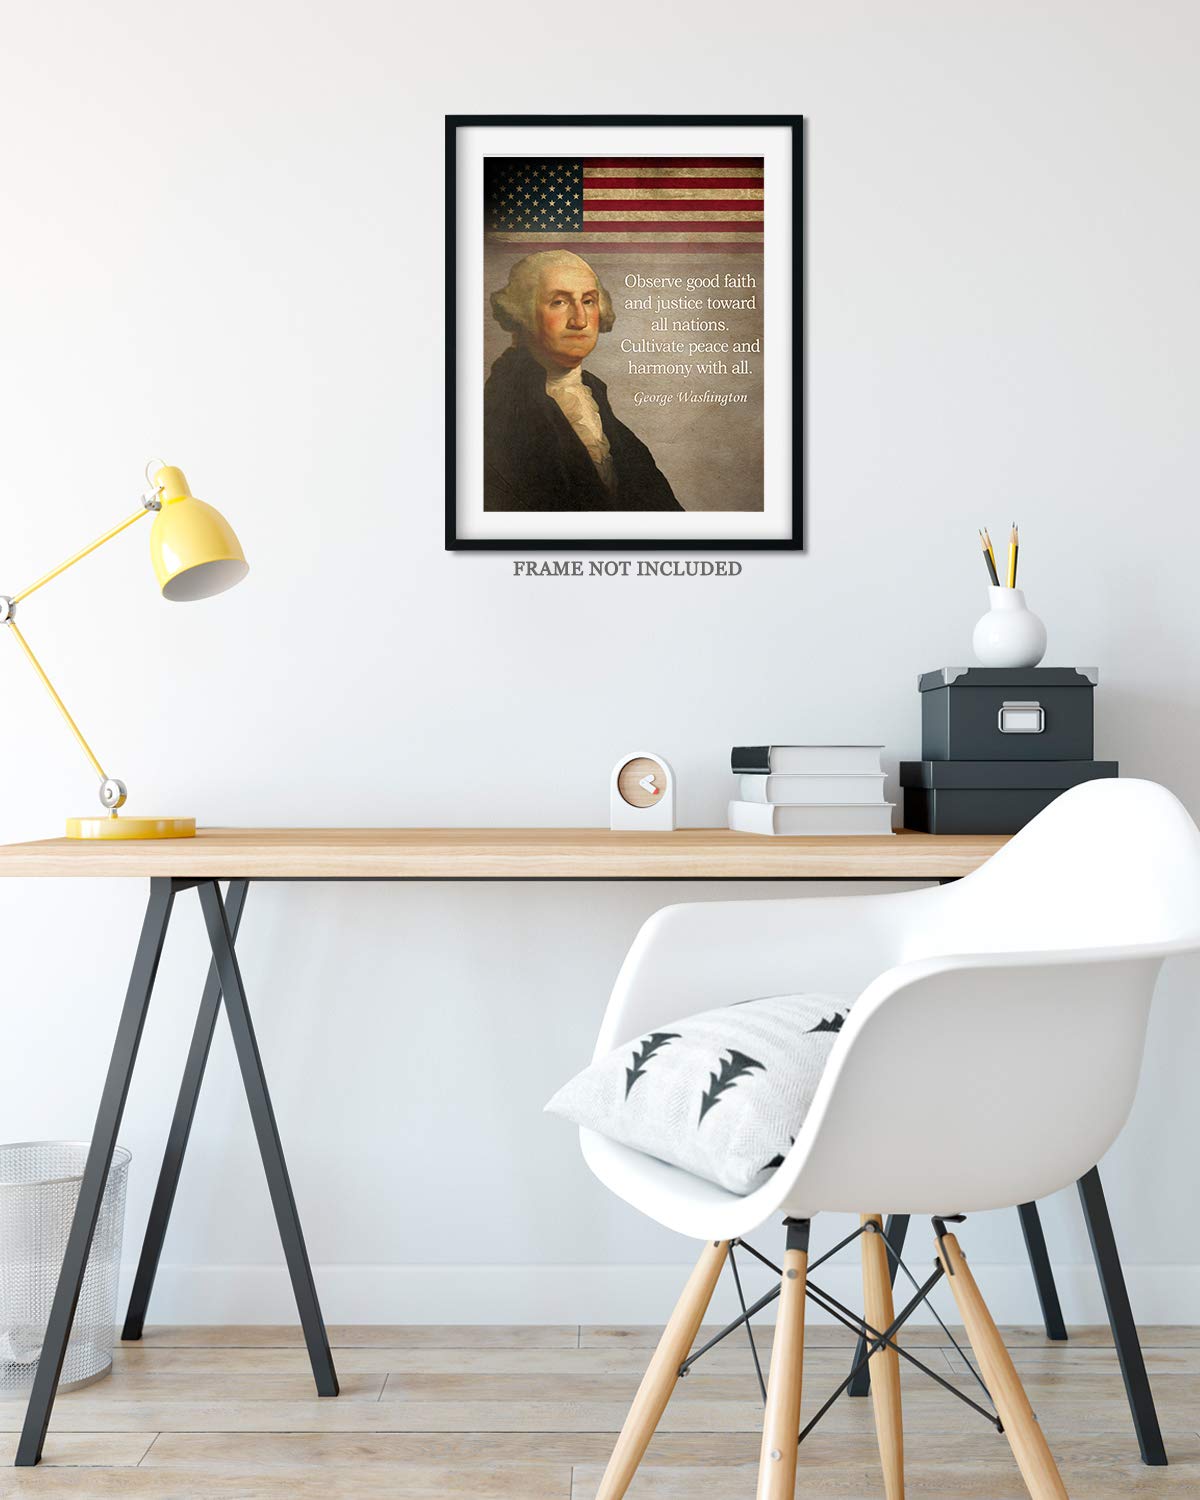 George Washington Historic Quote - Observe good faith - Great Inspirational Gift - Motivational Print - American Patriotic President